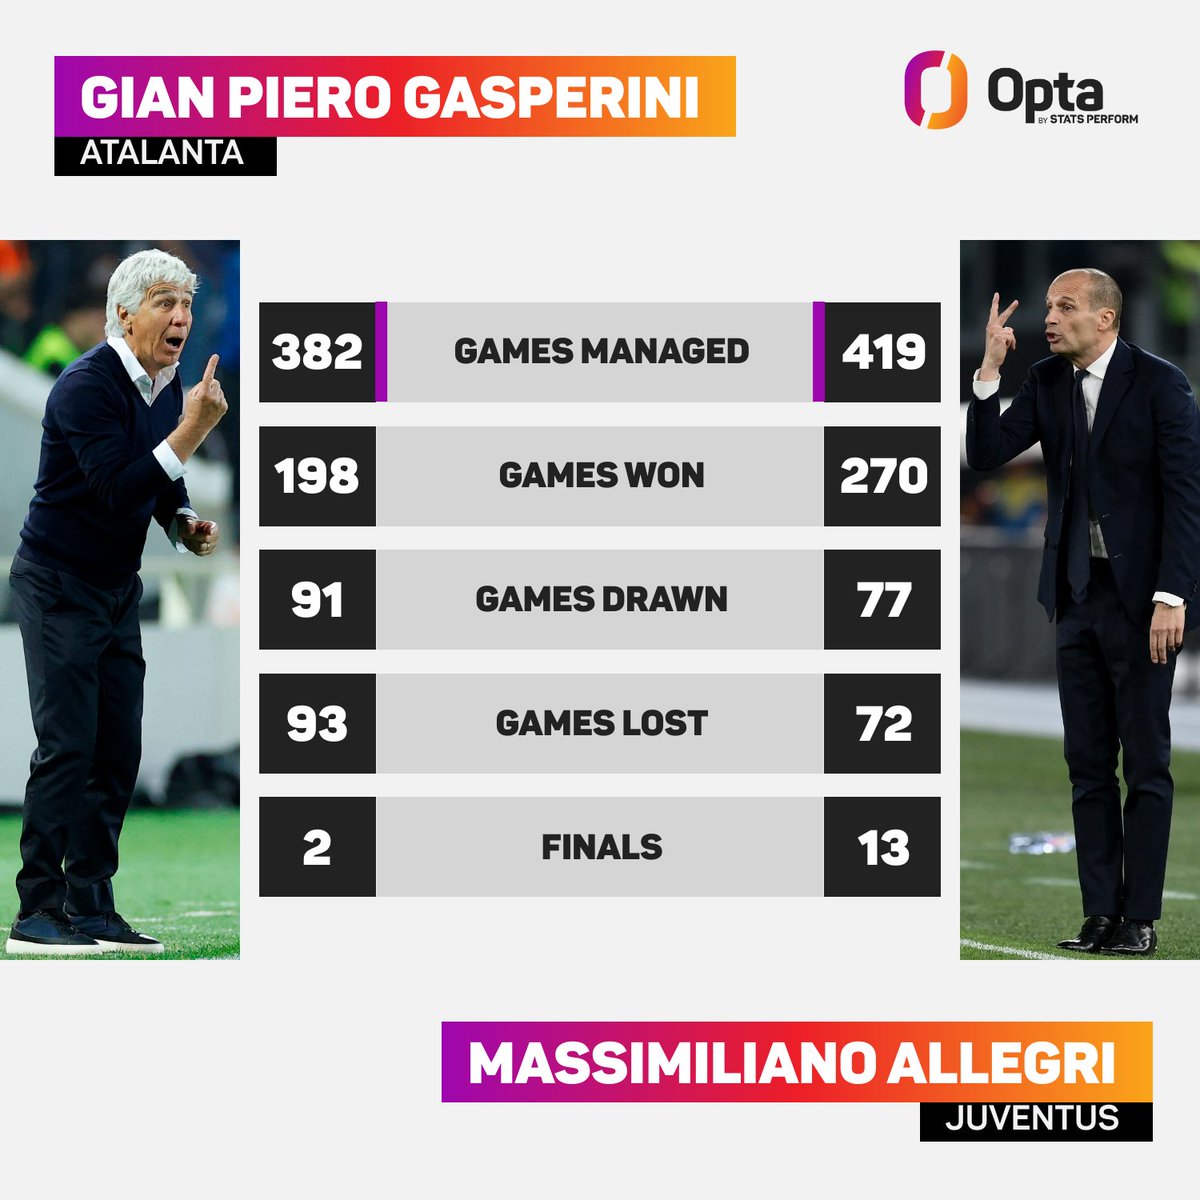 1 & 2 - The manager with the most games managed in Atalanta's history (#Gasperini - 382) and the manager with the second most games managed in Juventus' history (#Allegri - 419, Trapattoni - 596) in the Serie A era, will face off in tonight's #CoppaItalia final. Legends.